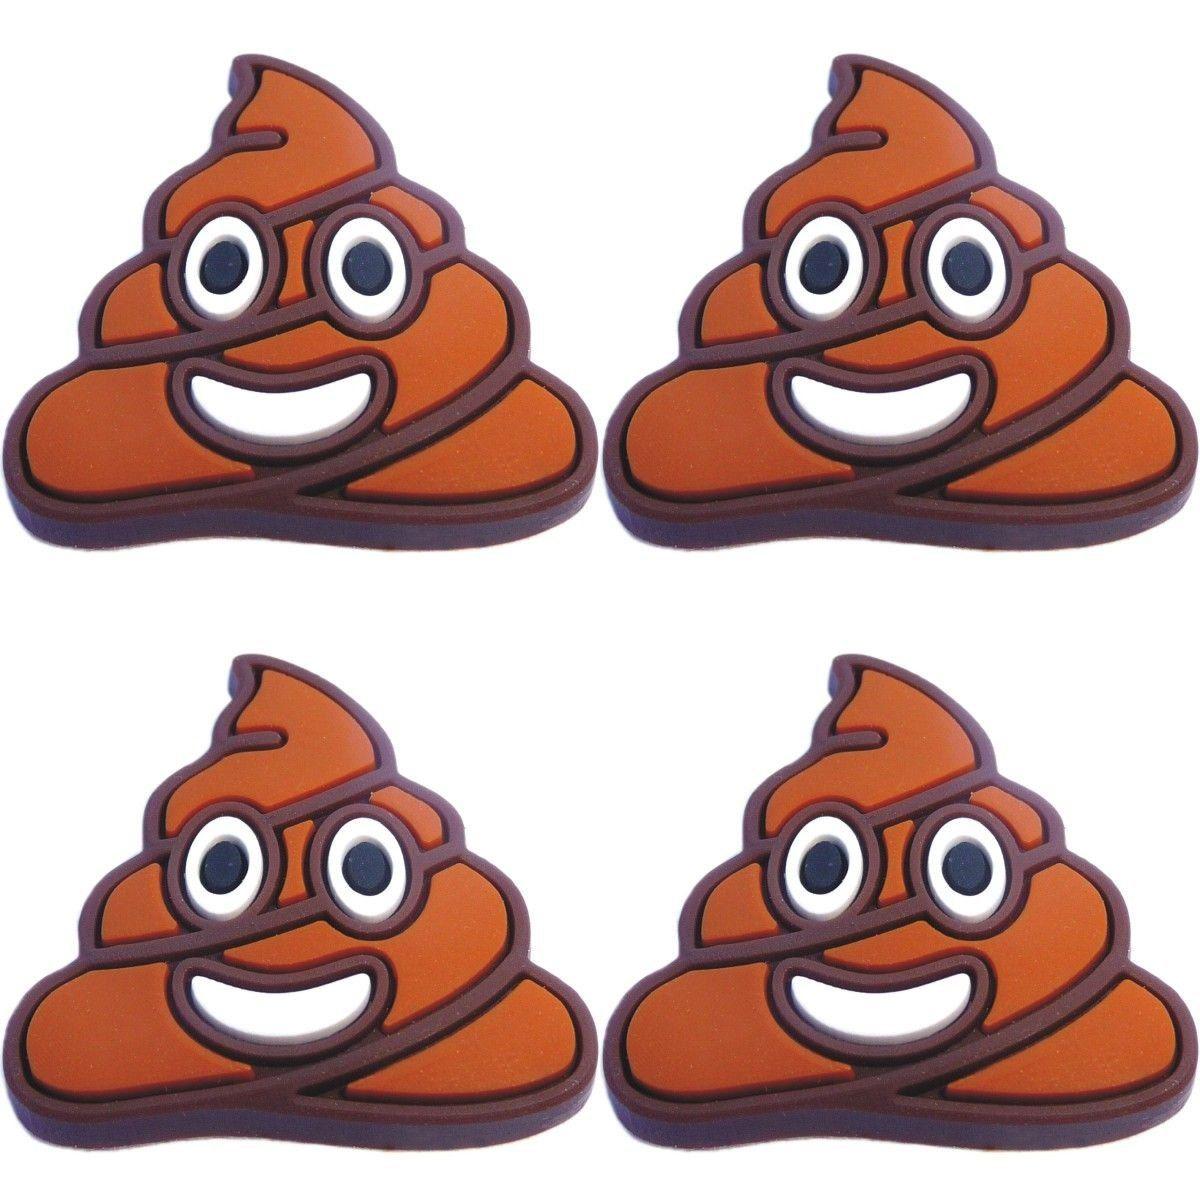 Poop Emoji Logo - Amazon.com: Four (4) of Poop Emoji Rubber Charms for Wristbands and ...